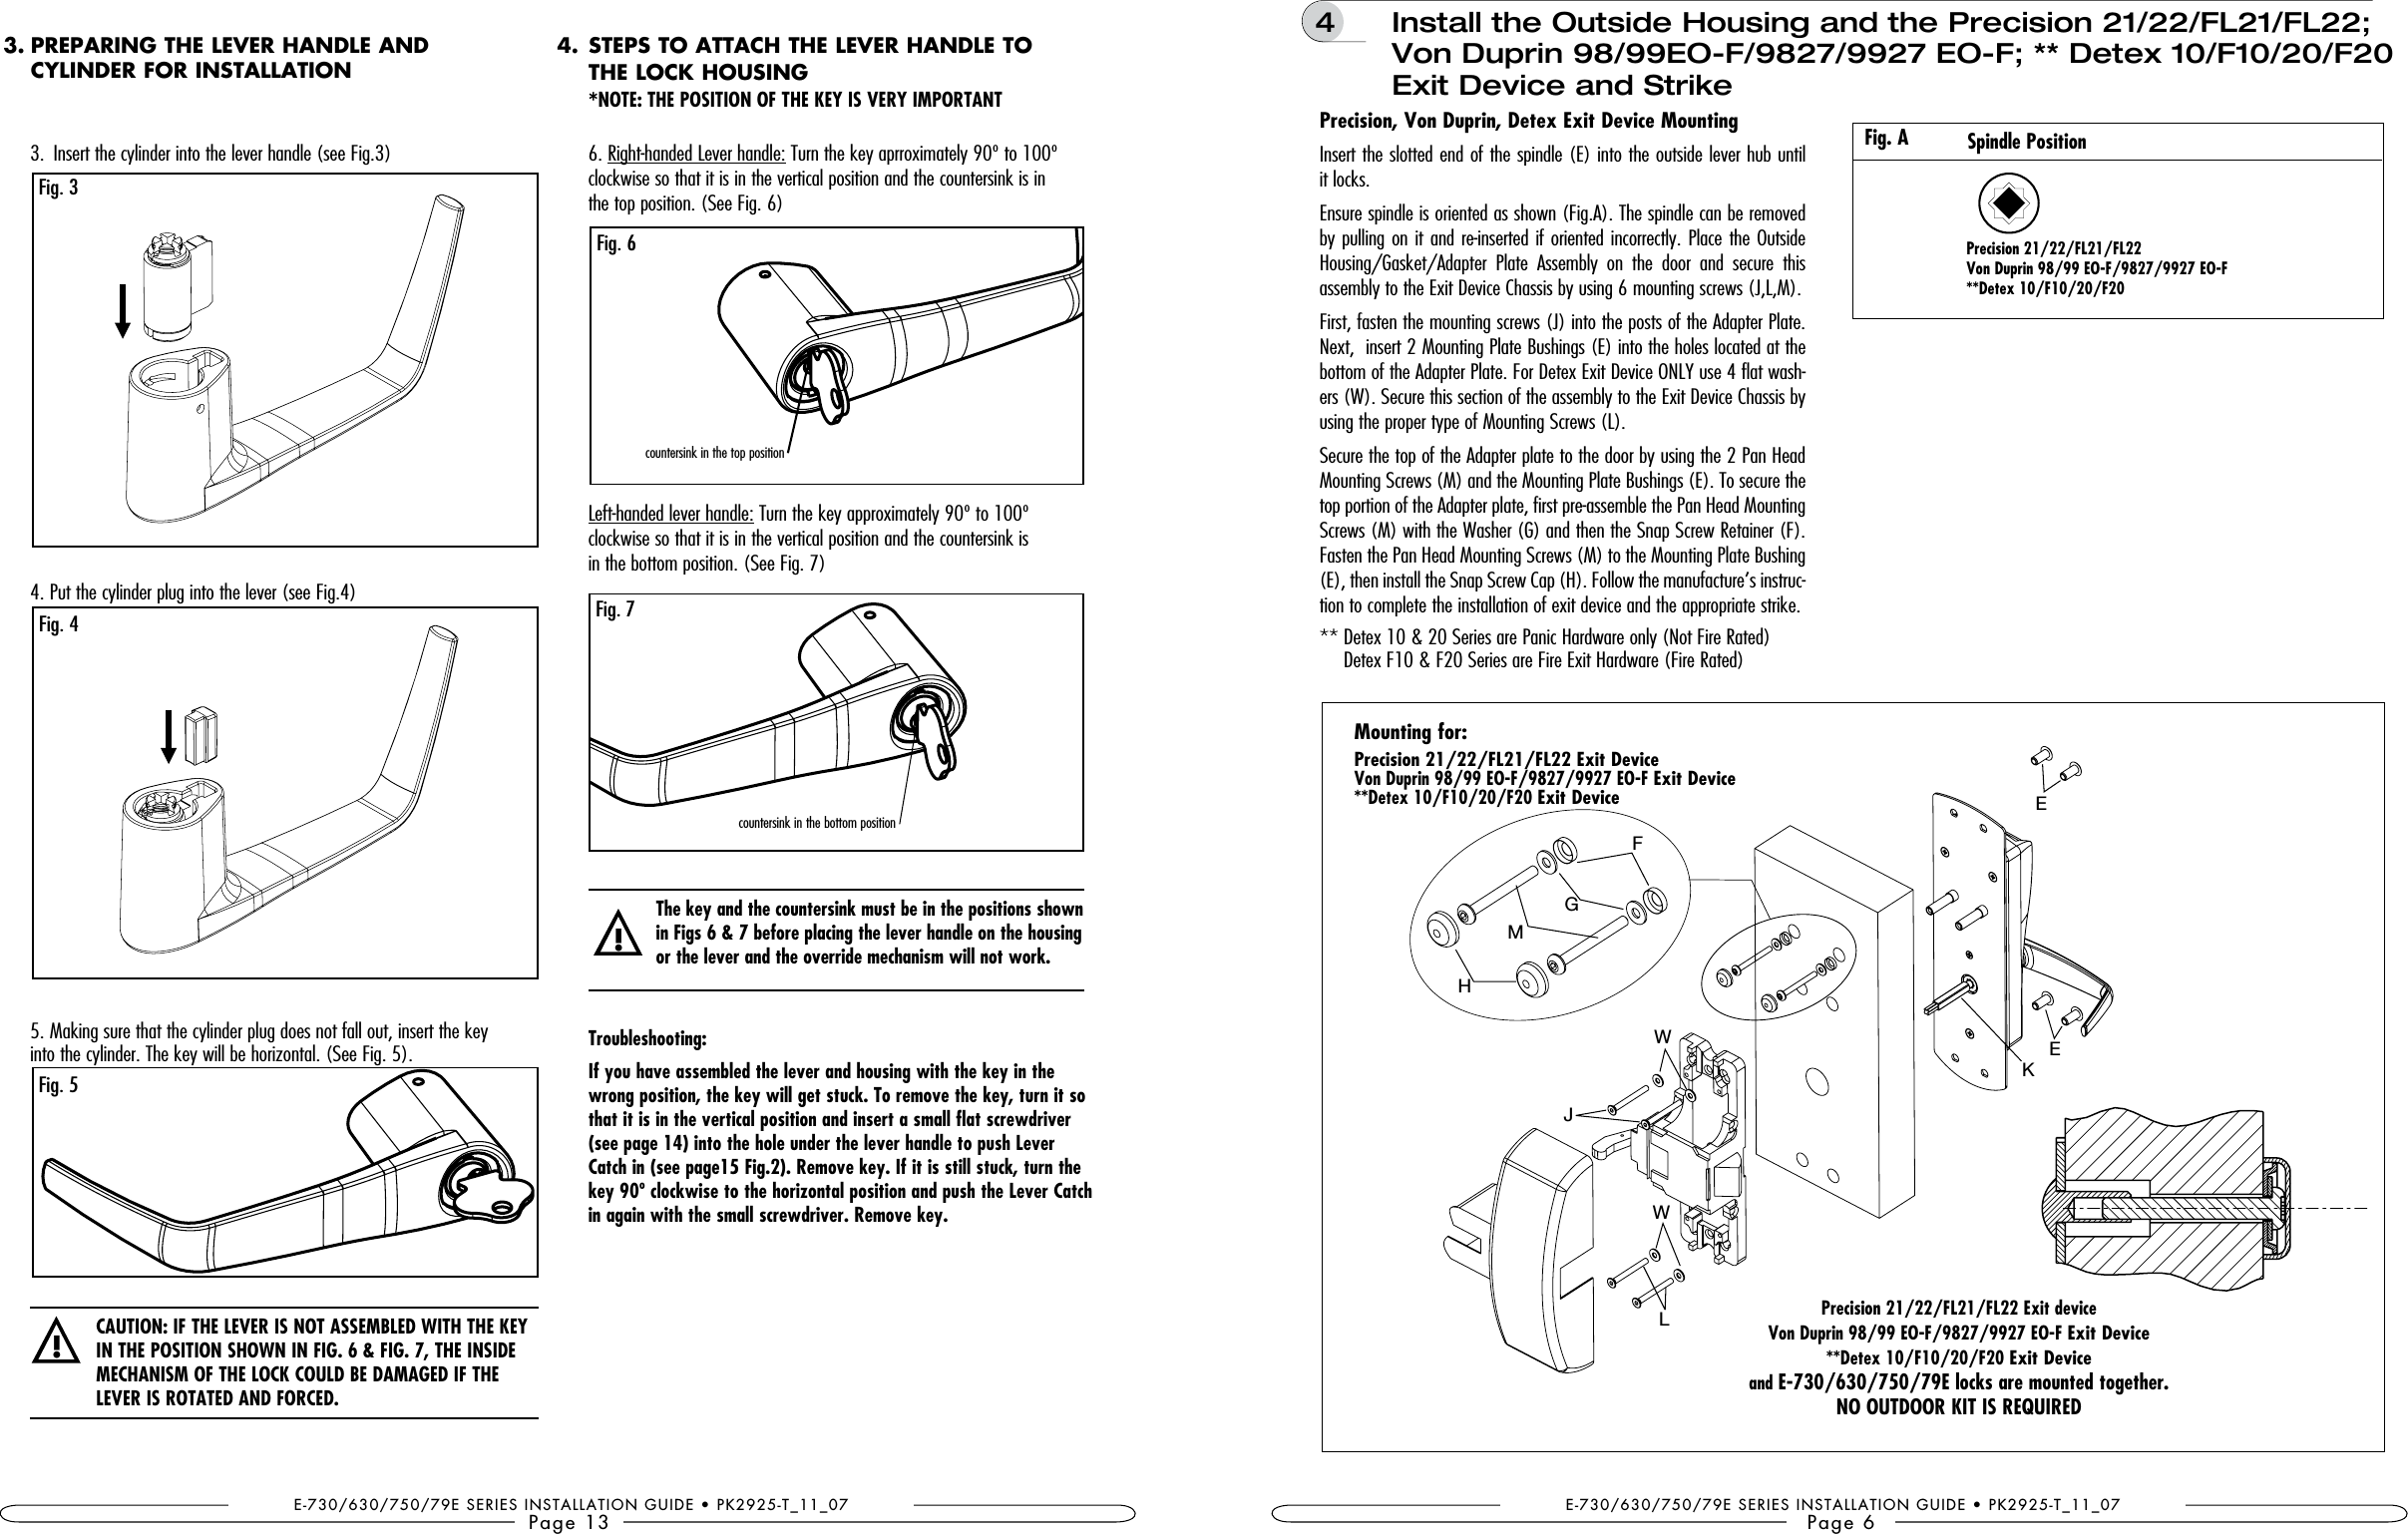 E-730/630/750/79E SERIES INSTALLATION GUIDE • PK2925-T_11_07Page 133.  Insert the cylinder into the lever handle (see Fig.3)4. Put the cylinder plug into the lever (see Fig.4) 5. Making sure that the cylinder plug does not fall out, insert the key  into the cylinder. The key will be horizontal. (See Fig. 5). Fig. 3Fig. 5Fig. 4!PREPARING THE LEVER HANDLE AND  CYLINDER FOR INSTALLATION3.6. Right-handed Lever handle: Turn the key aprroximately 90º to 100º  clockwise so that it is in the vertical position and the countersink is in  the top position. (See Fig. 6)Left-handed lever handle: Turn the key approximately 90º to 100º  clockwise so that it is in the vertical position and the countersink is  in the bottom position. (See Fig. 7)Troubleshooting:If you have assembled the lever and housing with the key in the wrong position, the key will get stuck. To remove the key, turn it so that it is in the vertical position and insert a small flat screwdriver Catch in (see page15 Fig.2). Remove key. If it is still stuck, turn the in again with the small screwdriver. Remove key.!The key and the countersink must be in the positions shown   or the lever and the override mechanism will not work.Fig. 6countersink in the top positionFig. 7countersink in the bottom positionSTEPS TO ATTACH THE LEVER HANDLE TO  THE LOCK HOUSING *NOTE: 4.E-730/630/750/79E SERIES INSTALLATION GUIDE • PK2925-T_11_07Page 6Mounting for:     and  4   Install the Outside Housing and the Precision 21/22/FL21/FL22; Von Duprin 98/99EO-F/9827/9927 EO-F; ** Detex 10/F10/20/F20 Exit Device and StrikeInsert the slotted end of the spindle (E) into the outside lever hub until it locks.Ensure spindle is oriented as shown (Fig.A). The spindle can be removed by pulling on it and re-inserted if oriented incorrectly. Place the Outside Housing/Gasket/Adapter  Plate  Assembly  on  the  door  and  secure  this assembly to the Exit Device Chassis by using 6 mounting screws (J,L,M).First, fasten the mounting screws (J) into the posts of the Adapter Plate. Next,  insert 2 Mounting Plate Bushings (E) into the holes located at the bottom of the Adapter Plate. For Detex Exit Device ONLY use 4 flat wash-ers (W). Secure this section of the assembly to the Exit Device Chassis by using the proper type of Mounting Screws (L).Secure the top of the Adapter plate to the door by using the 2 Pan Head Mounting Screws (M) and the Mounting Plate Bushings (E). To secure the top portion of the Adapter plate, first pre-assemble the Pan Head Mounting Screws (M) with the Washer (G) and then the Snap Screw Retainer (F). Fasten the Pan Head Mounting Screws (M) to the Mounting Plate Bushing (E), then install the Snap Screw Cap (H). Follow the manufacture’s instruc-tion to complete the installation of exit device and the appropriate strike.**  Detex 10 &amp; 20 Series are Panic Hardware only (Not Fire Rated) Detex F10 &amp; F20 Series are Fire Exit Hardware (Fire Rated)Spindle PositionFig. AMLHGFJWWKEE